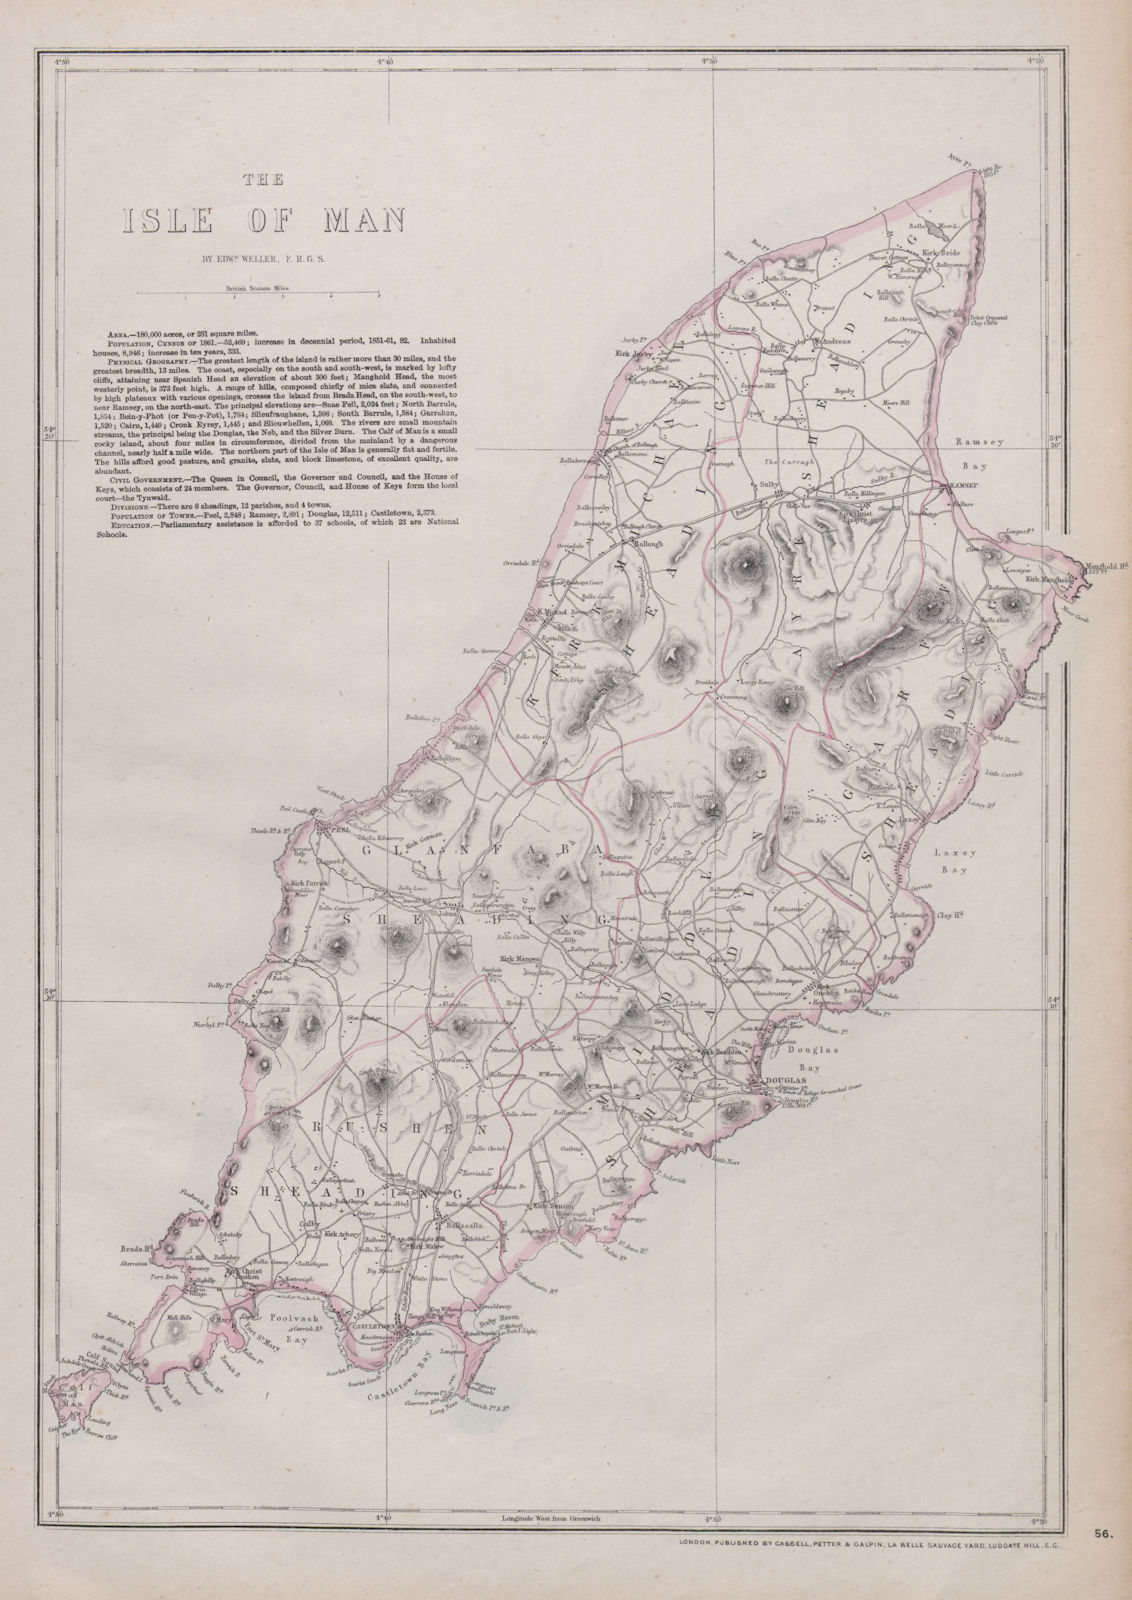 'The Isle of Man' showing Sheadings. WELLER 1868 old antique map plan chart